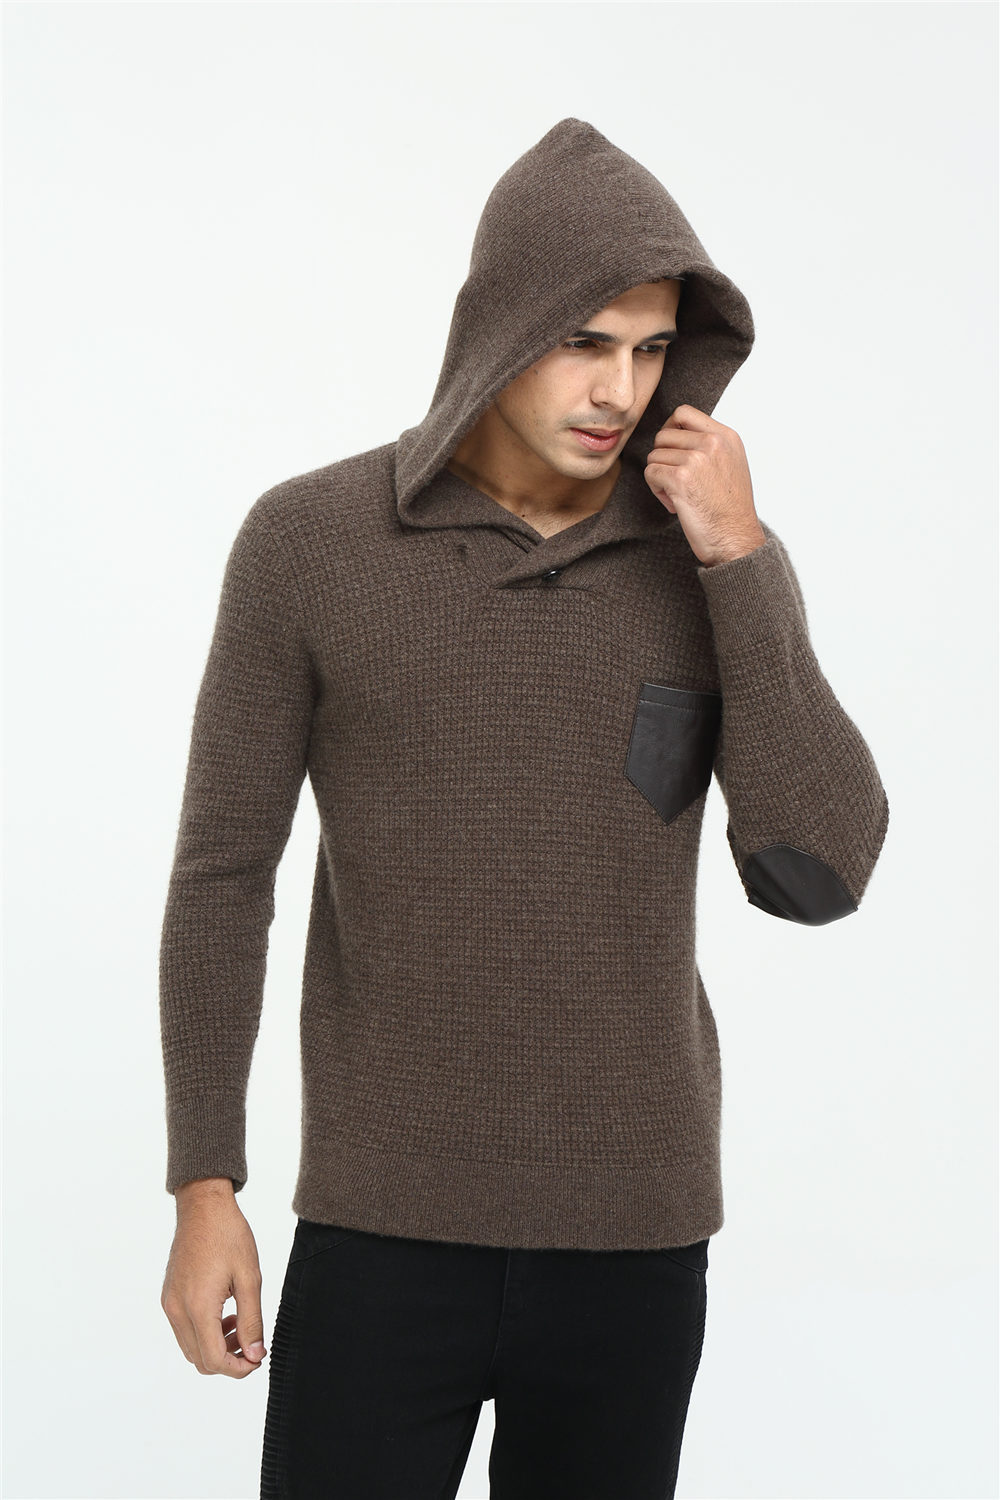 Mens Cashmere Sweater Hoodie